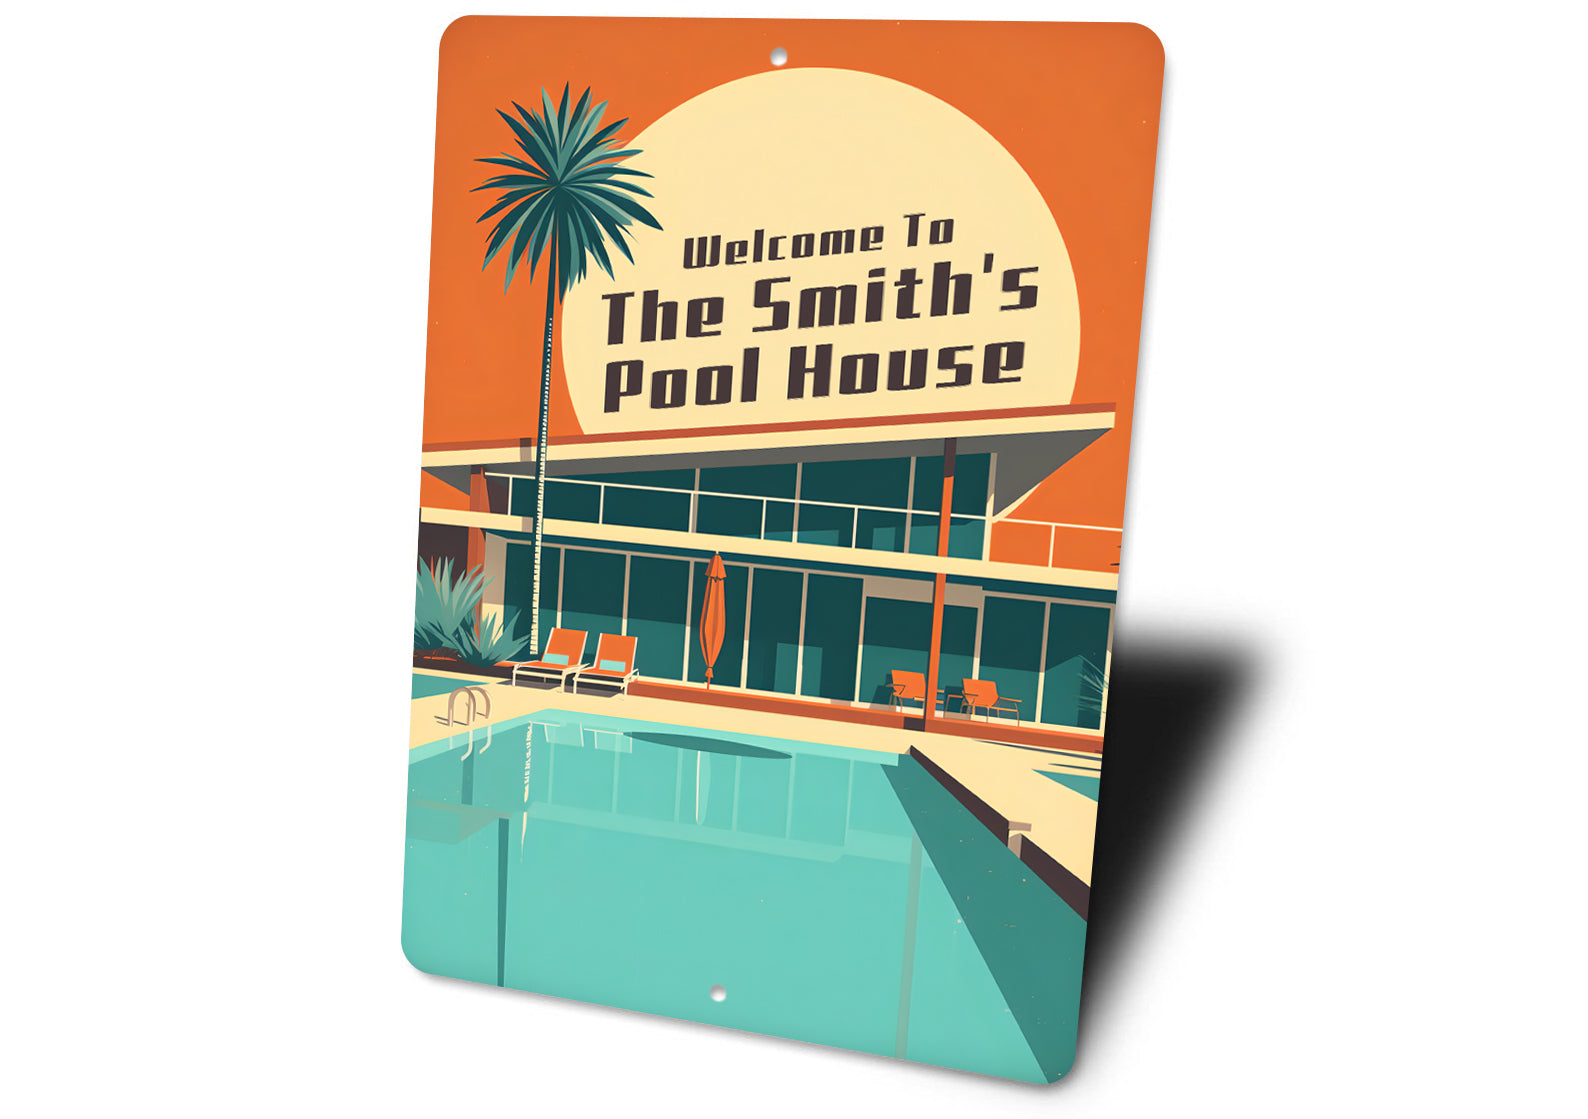 Welcome To Family Pool House Sign